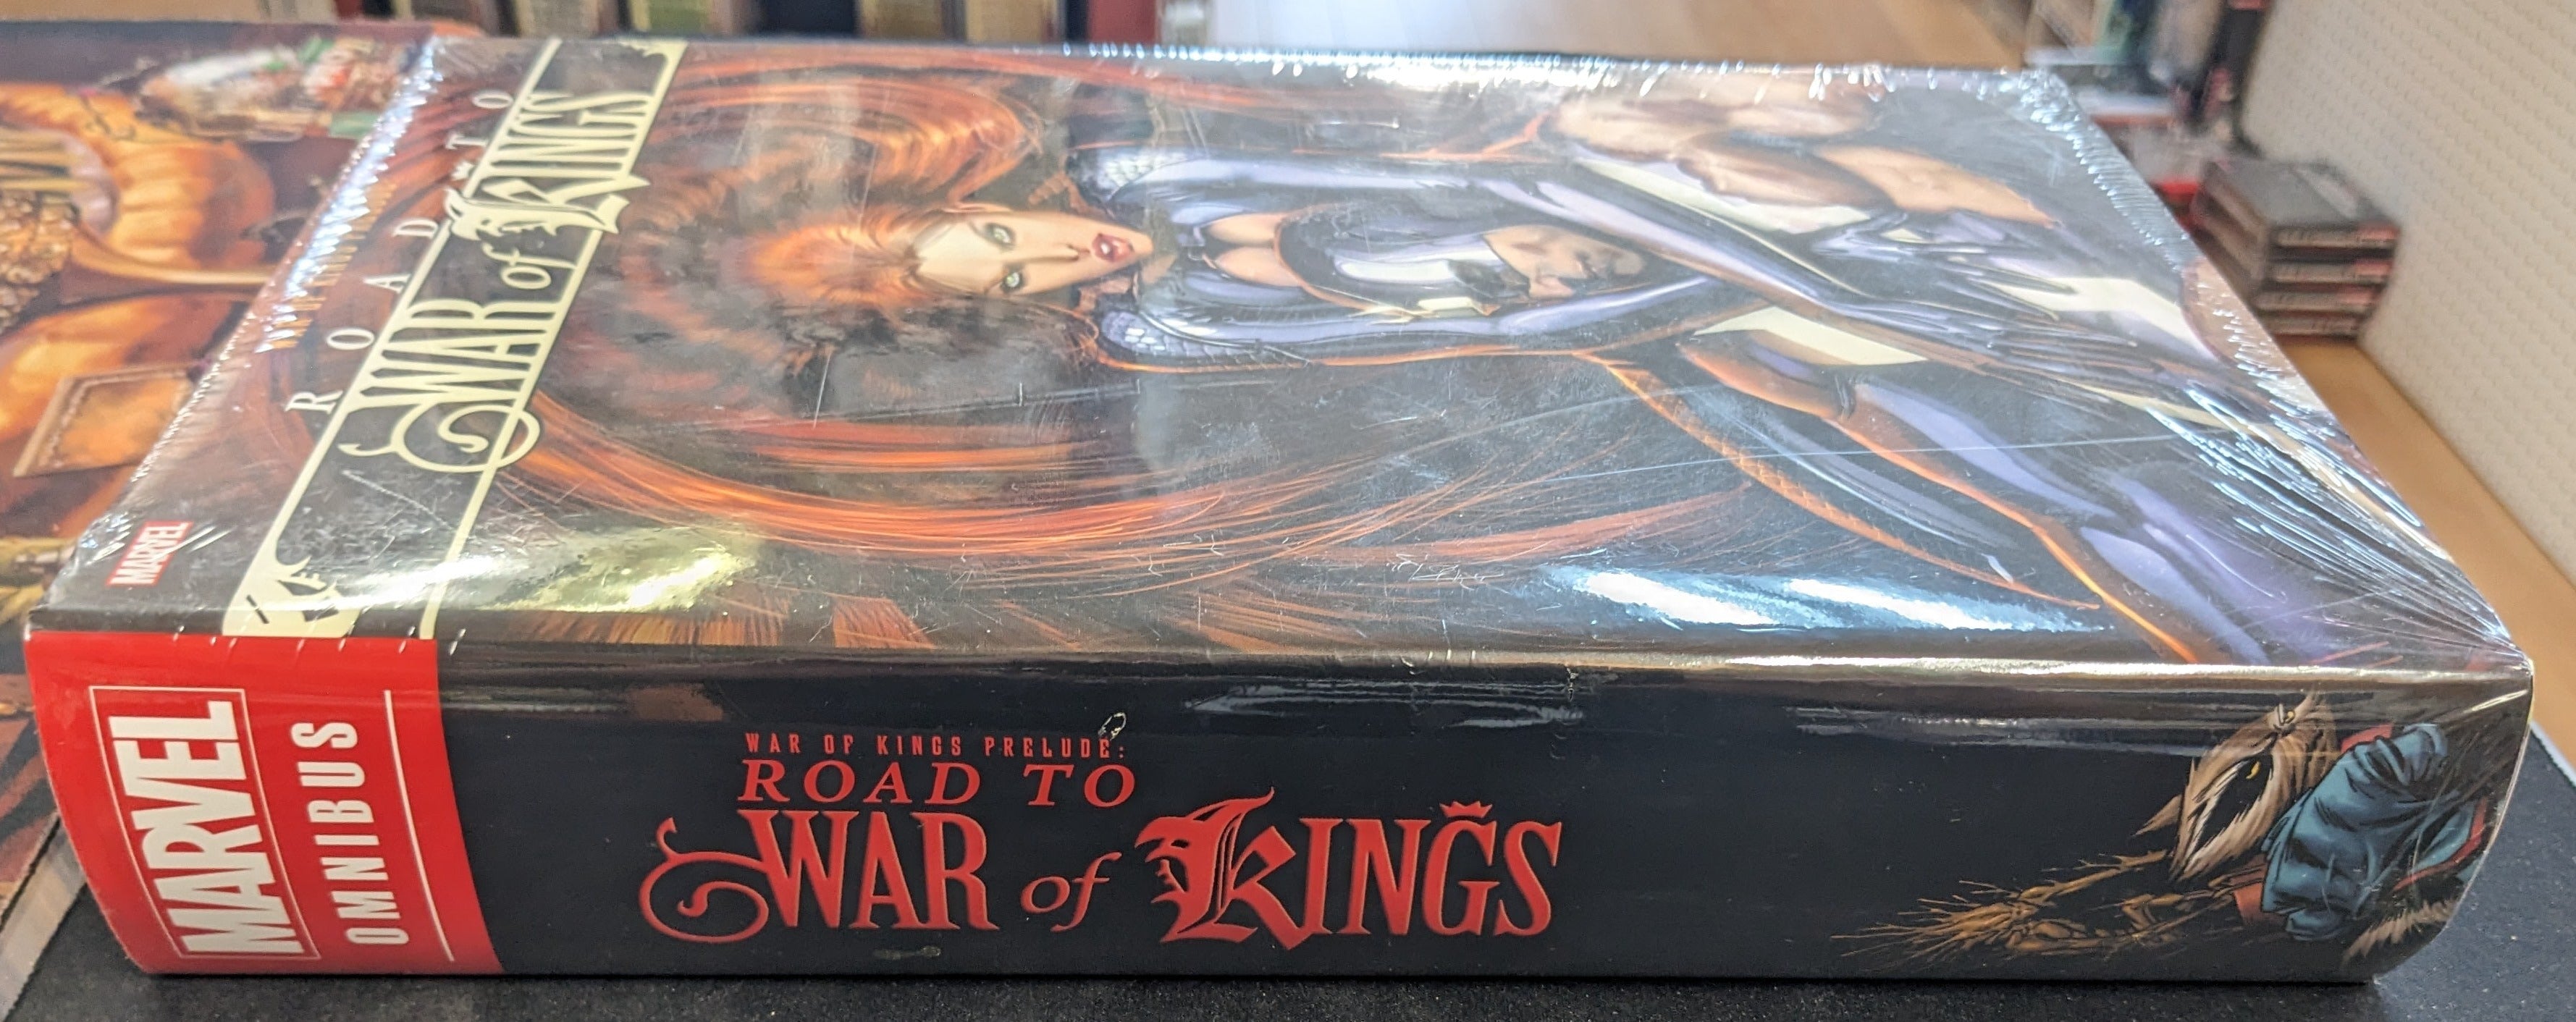 War Of Kings Prelude Couverture rigide Road To War Of Kings Omnibus | BD Cosmos